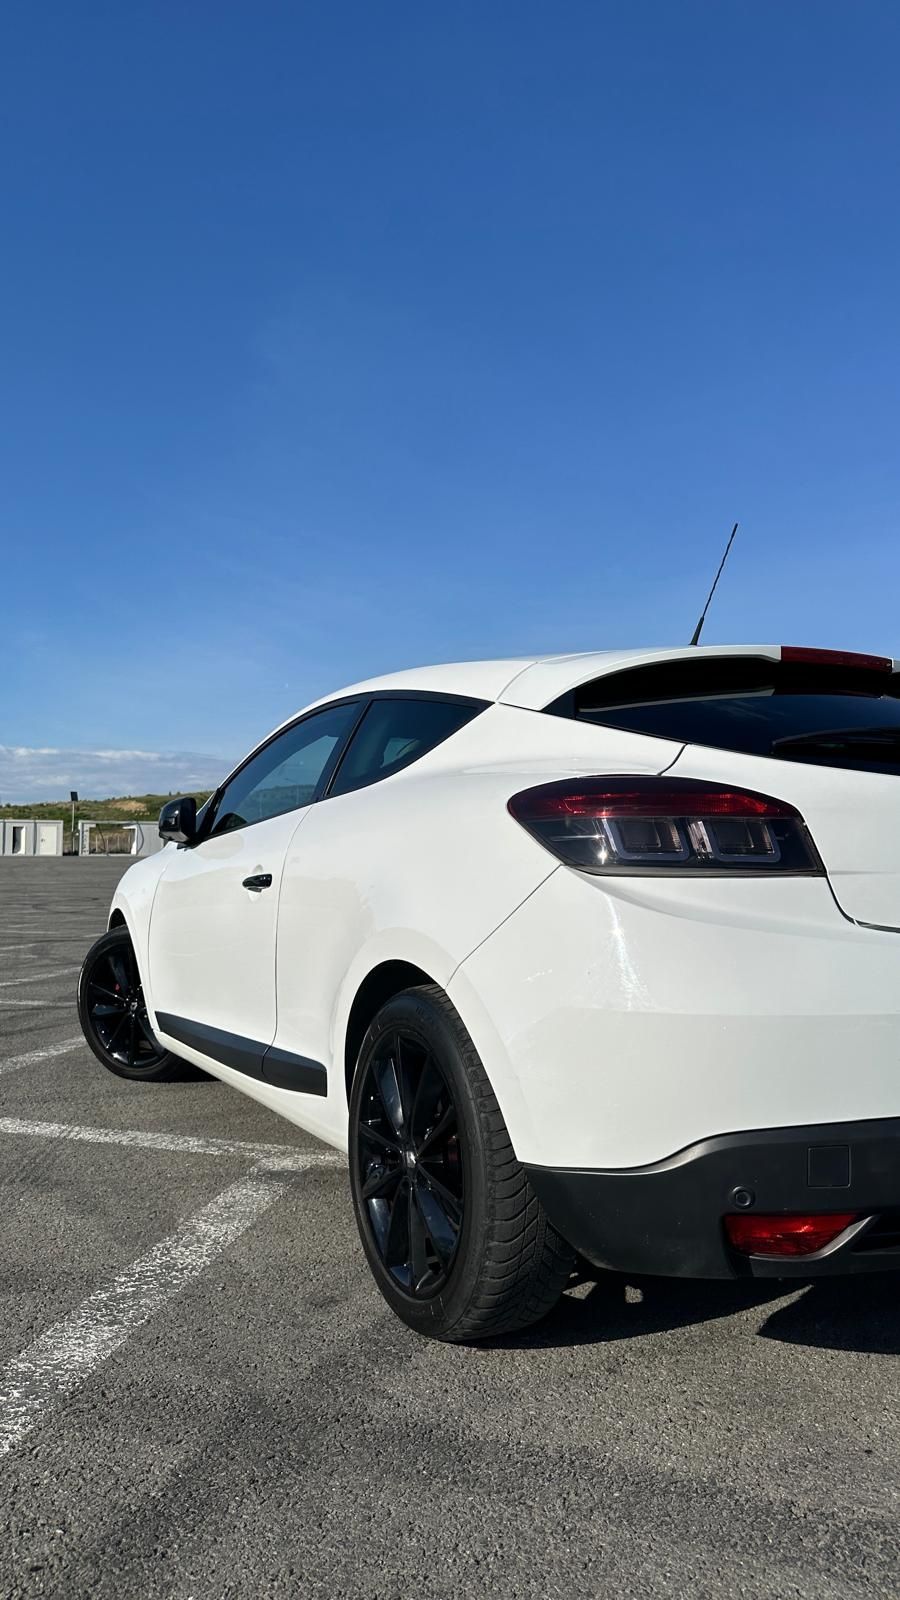 Renault Megane 3 coupe 1.4 tce